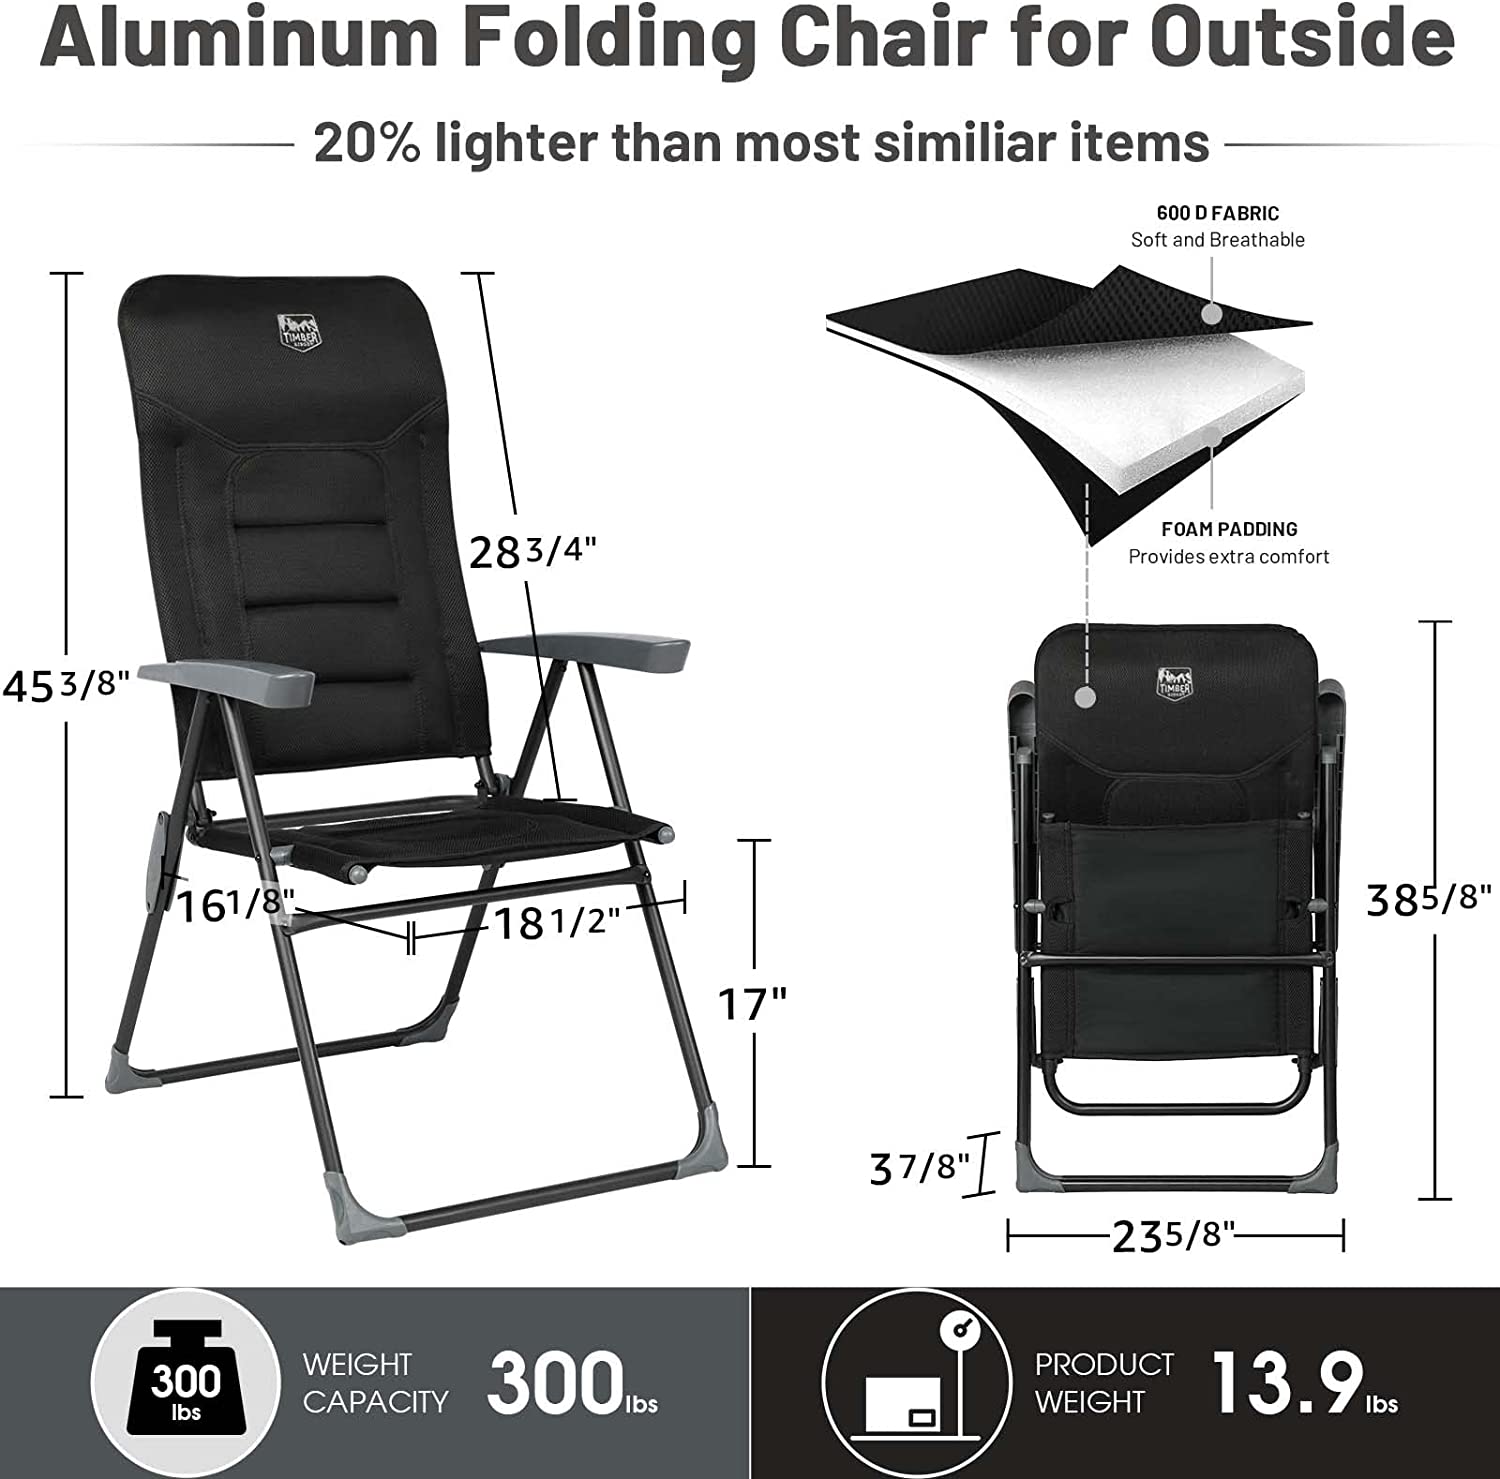 High Back Folding Camping Chair with 7-Level Adjustable Backrest, Foldable Reclining Patio Chair, Lightweight Aluminum Lawn Chair, Padded Outdoor Chair for Backyard, Deck, RV, Porch - image 5 of 8